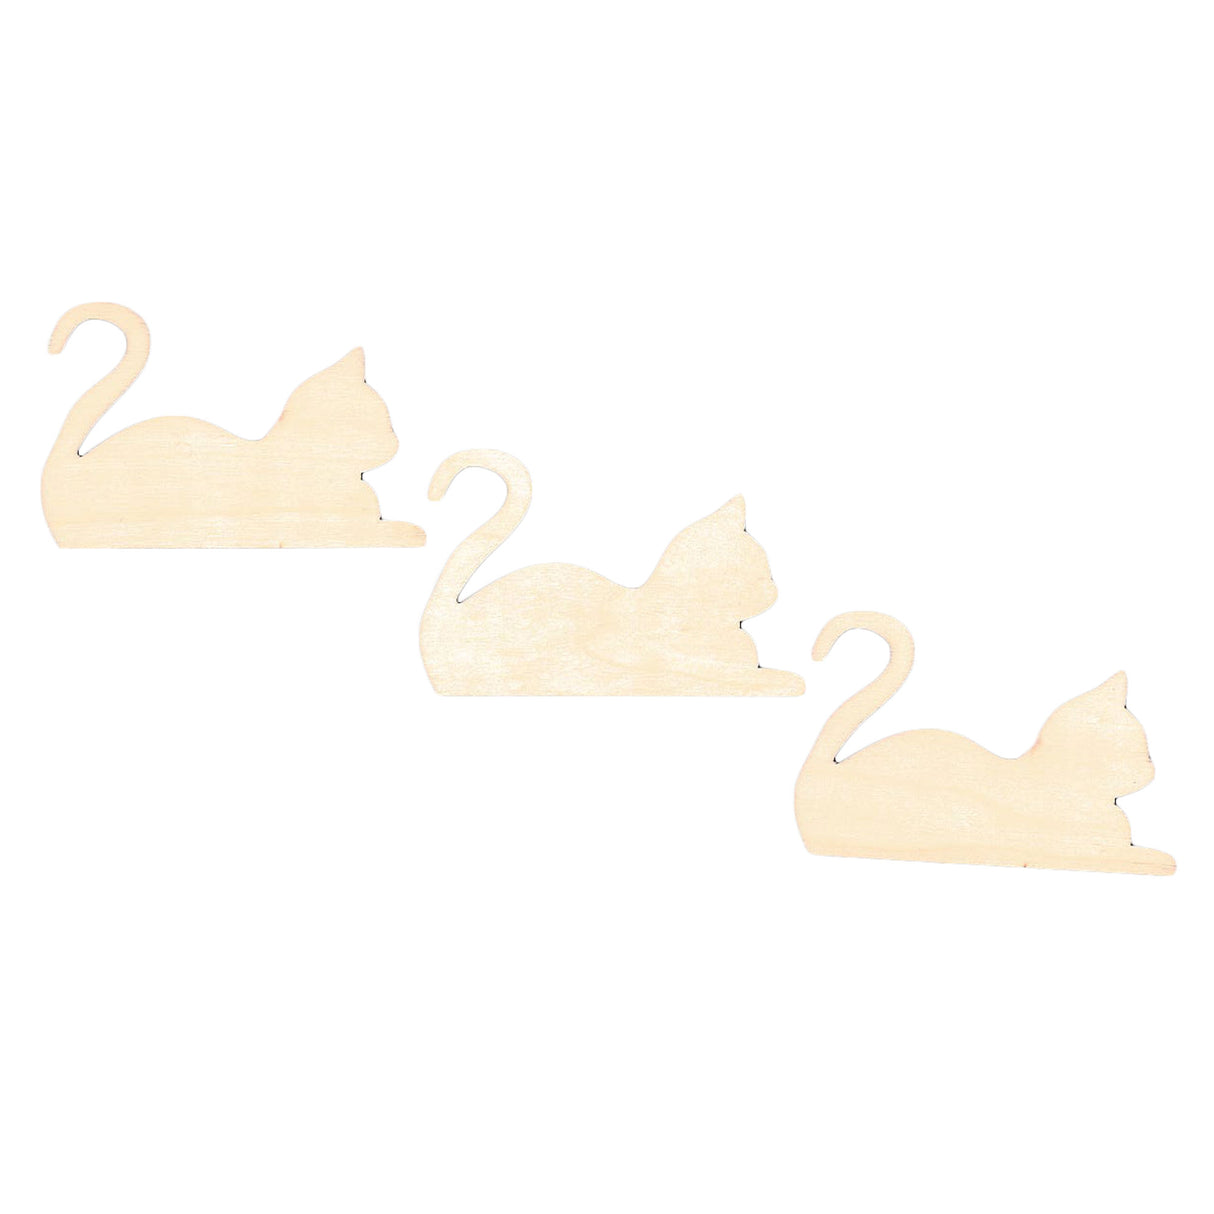 Wood 3 Cats Unfinished Wooden Shapes Craft Cutouts DIY Unpainted 3D Plaques 4 Inches in Beige color